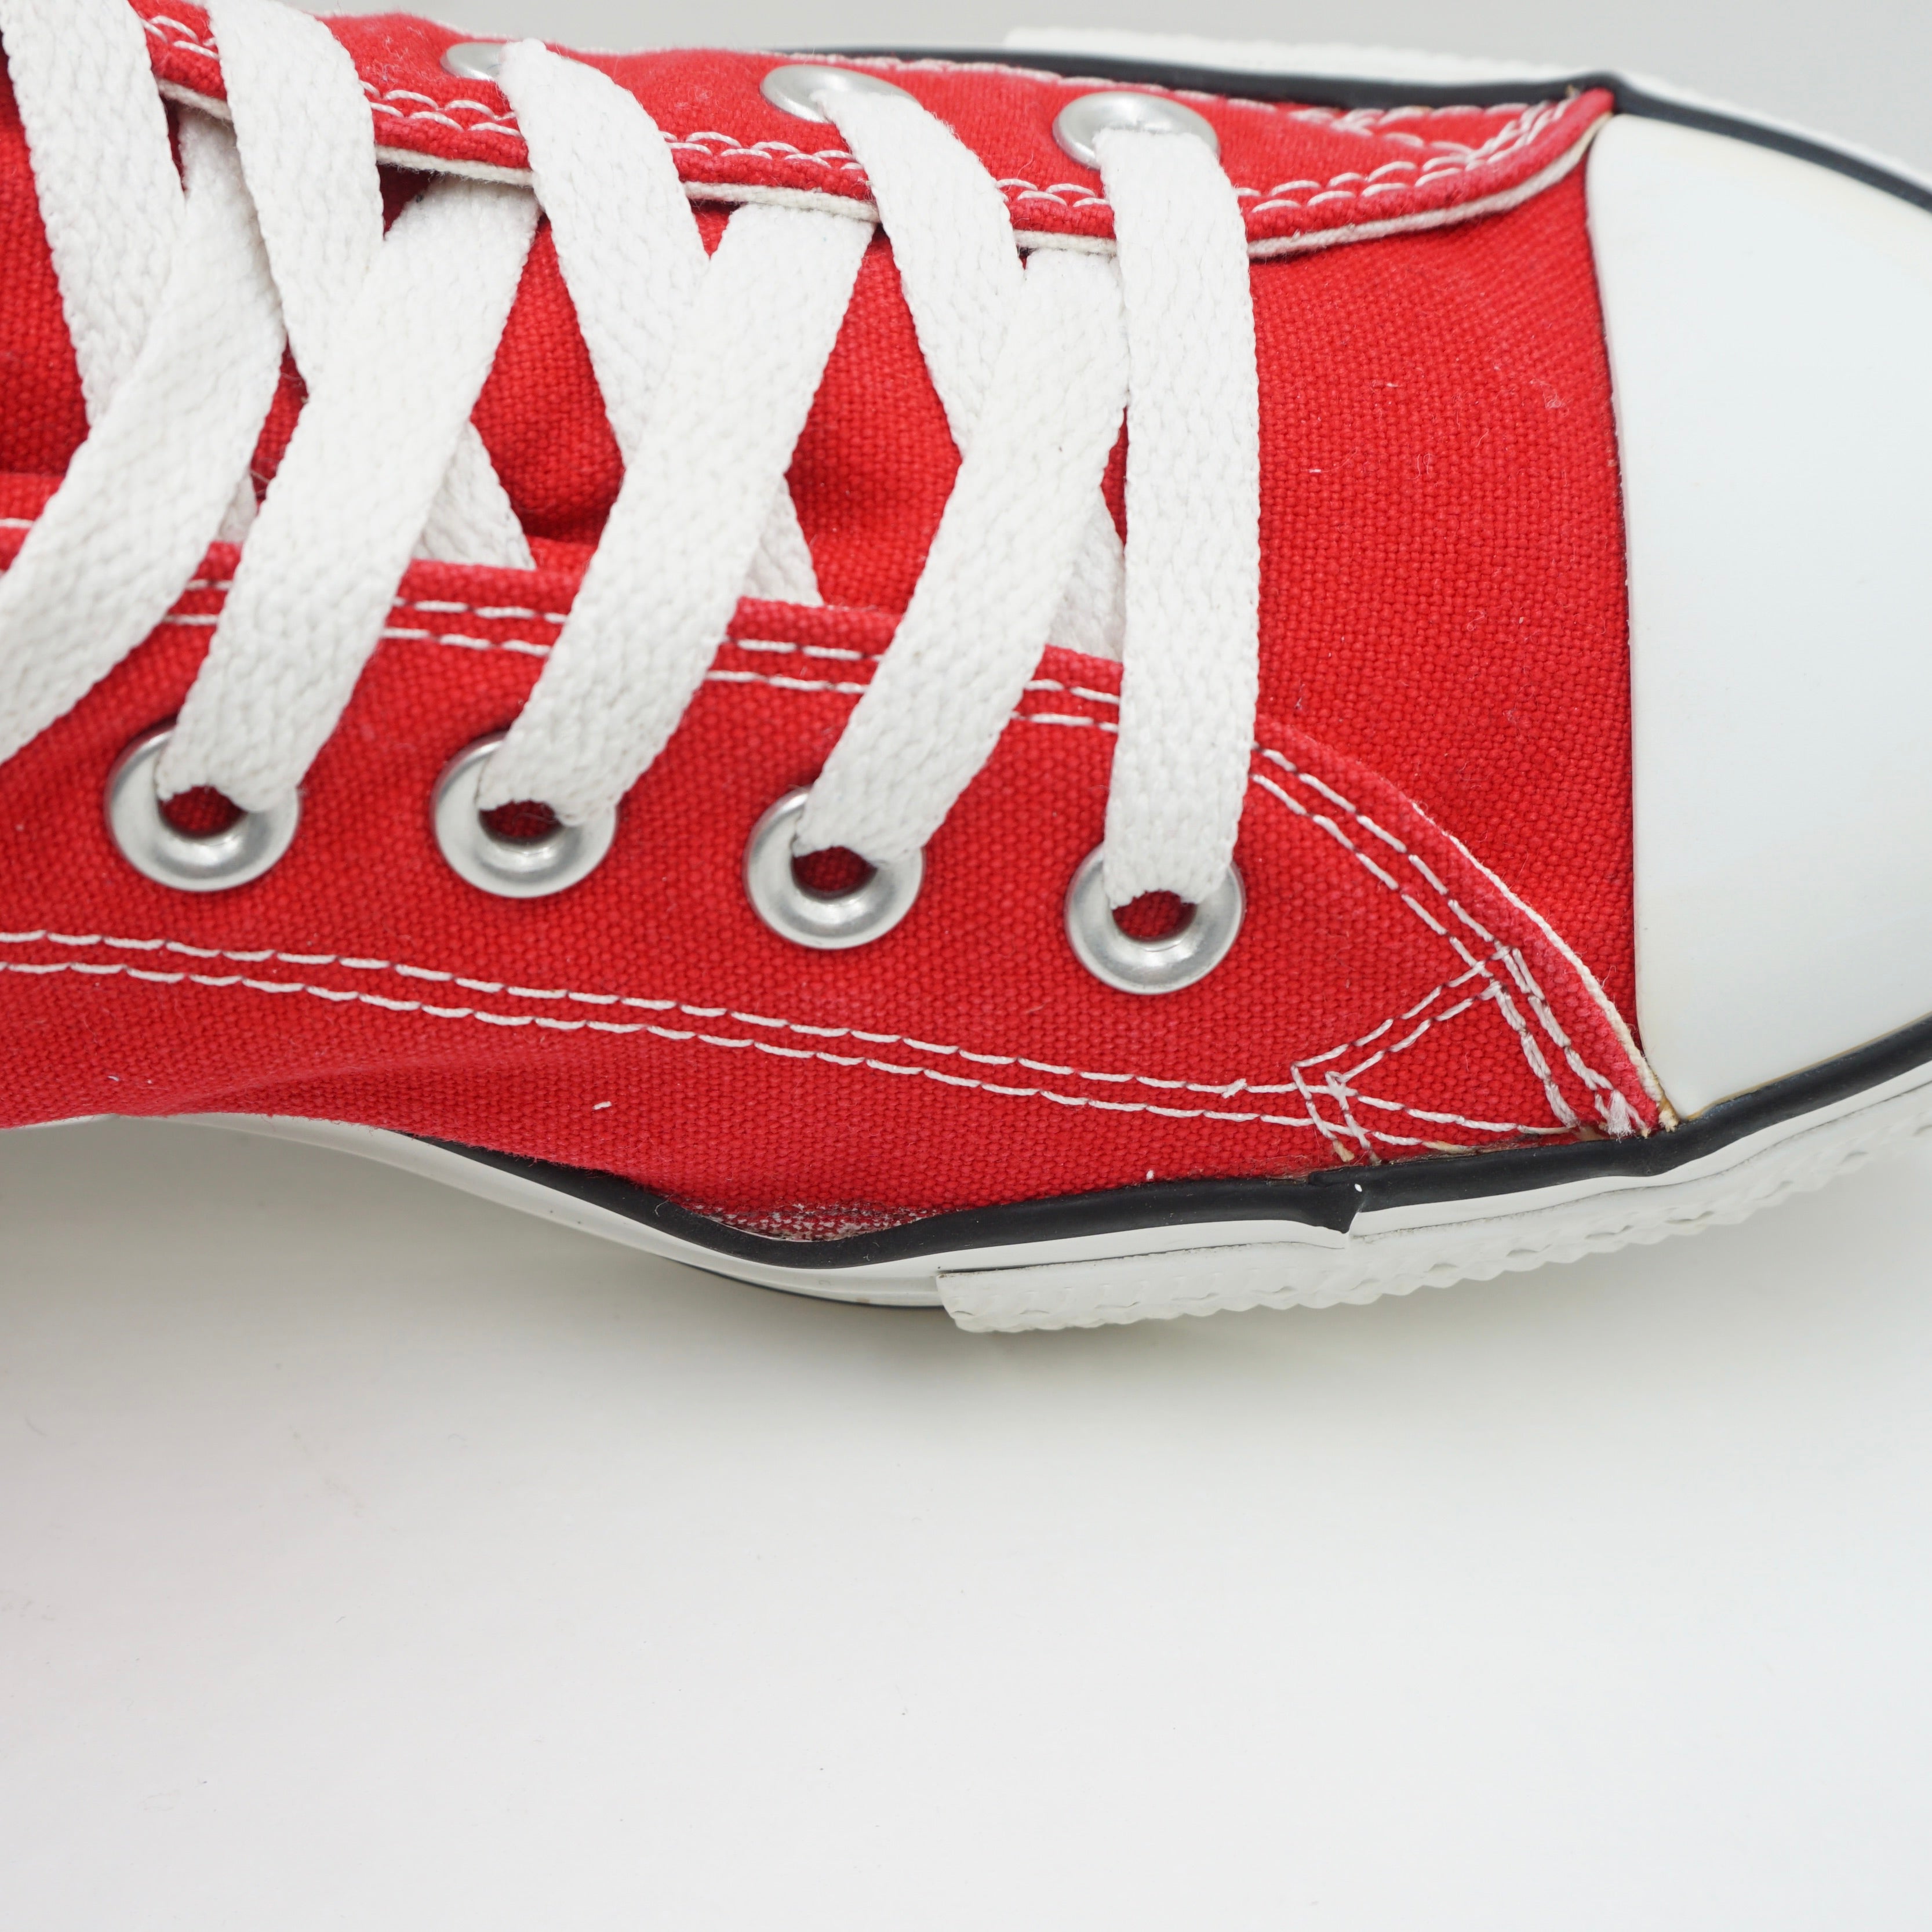 Converse Chuck Taylor All Star High Red